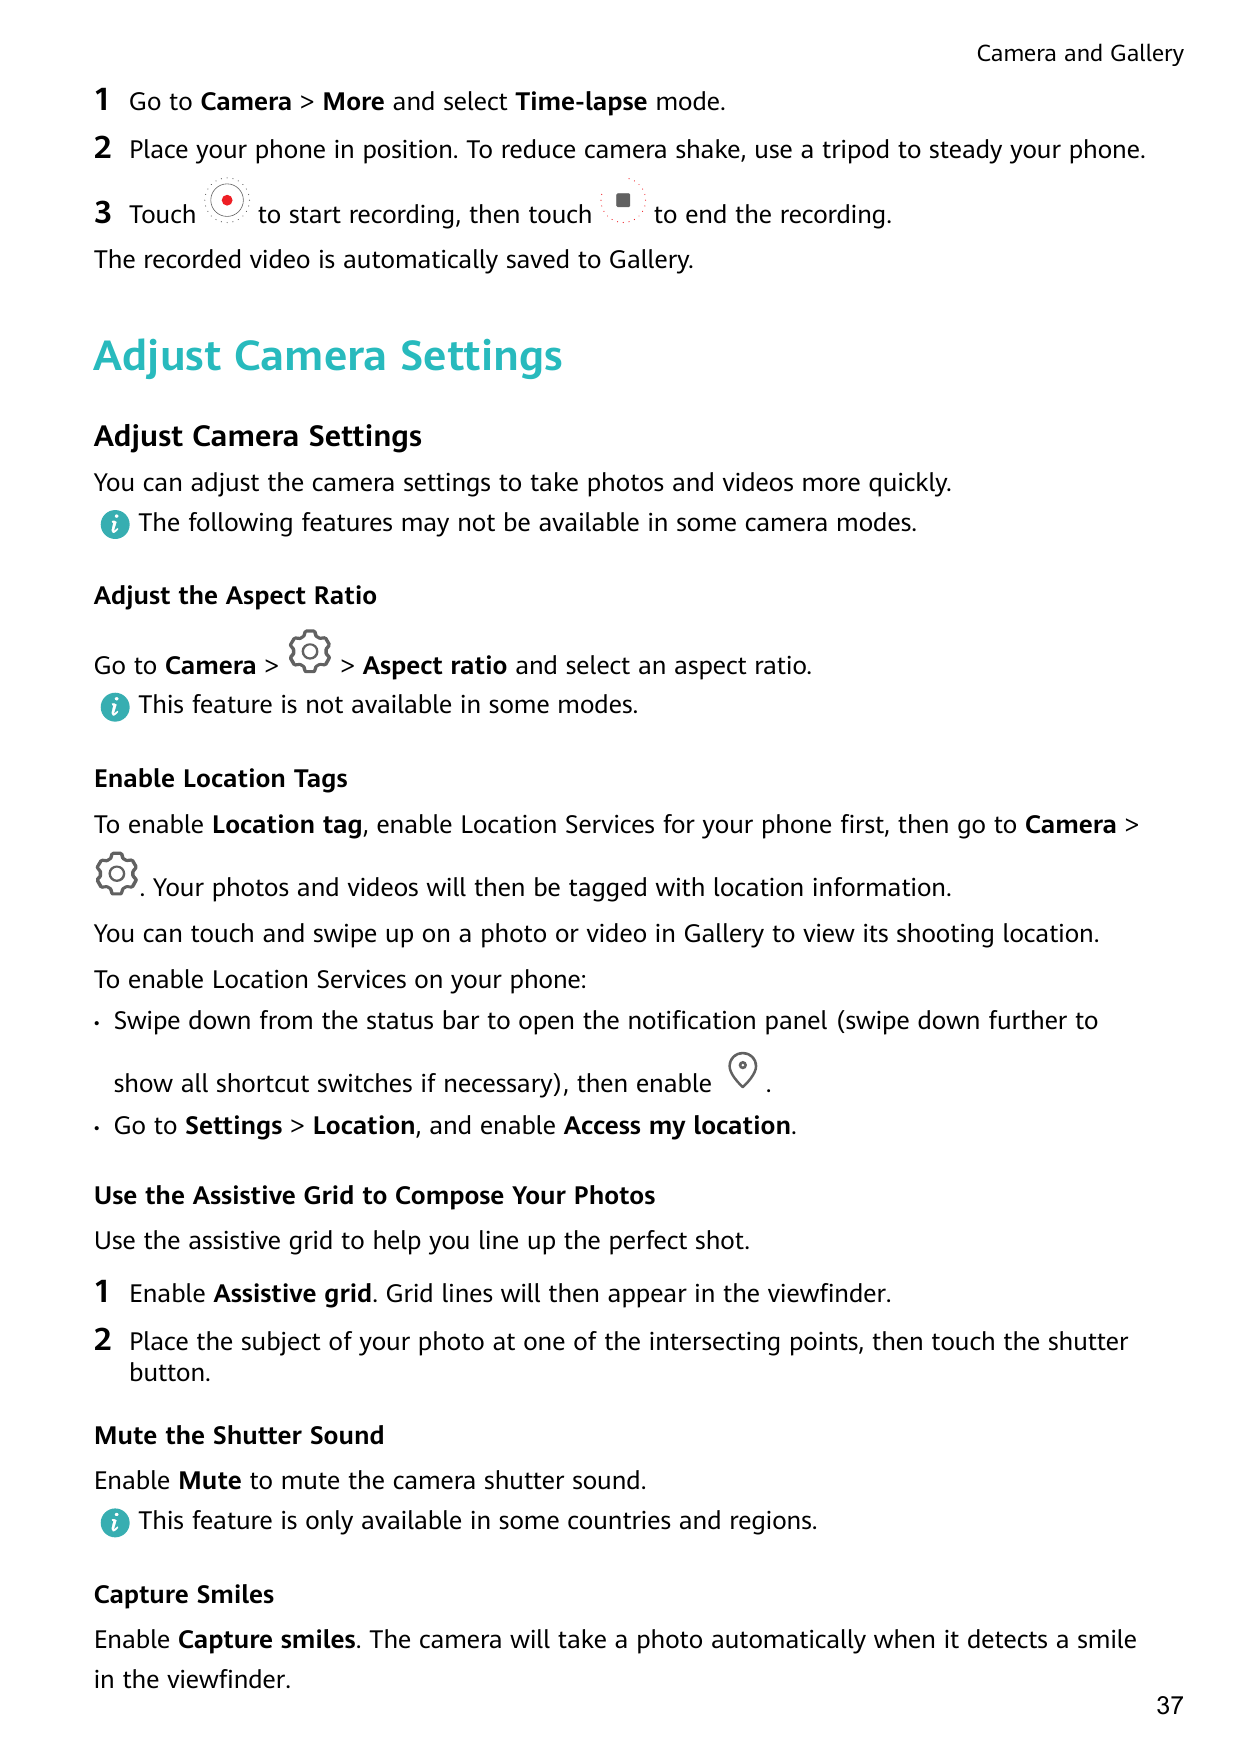 Camera and Gallery1Go to Camera > More and select Time-lapse mode.2Place your phone in position. To reduce camera shake, use a t